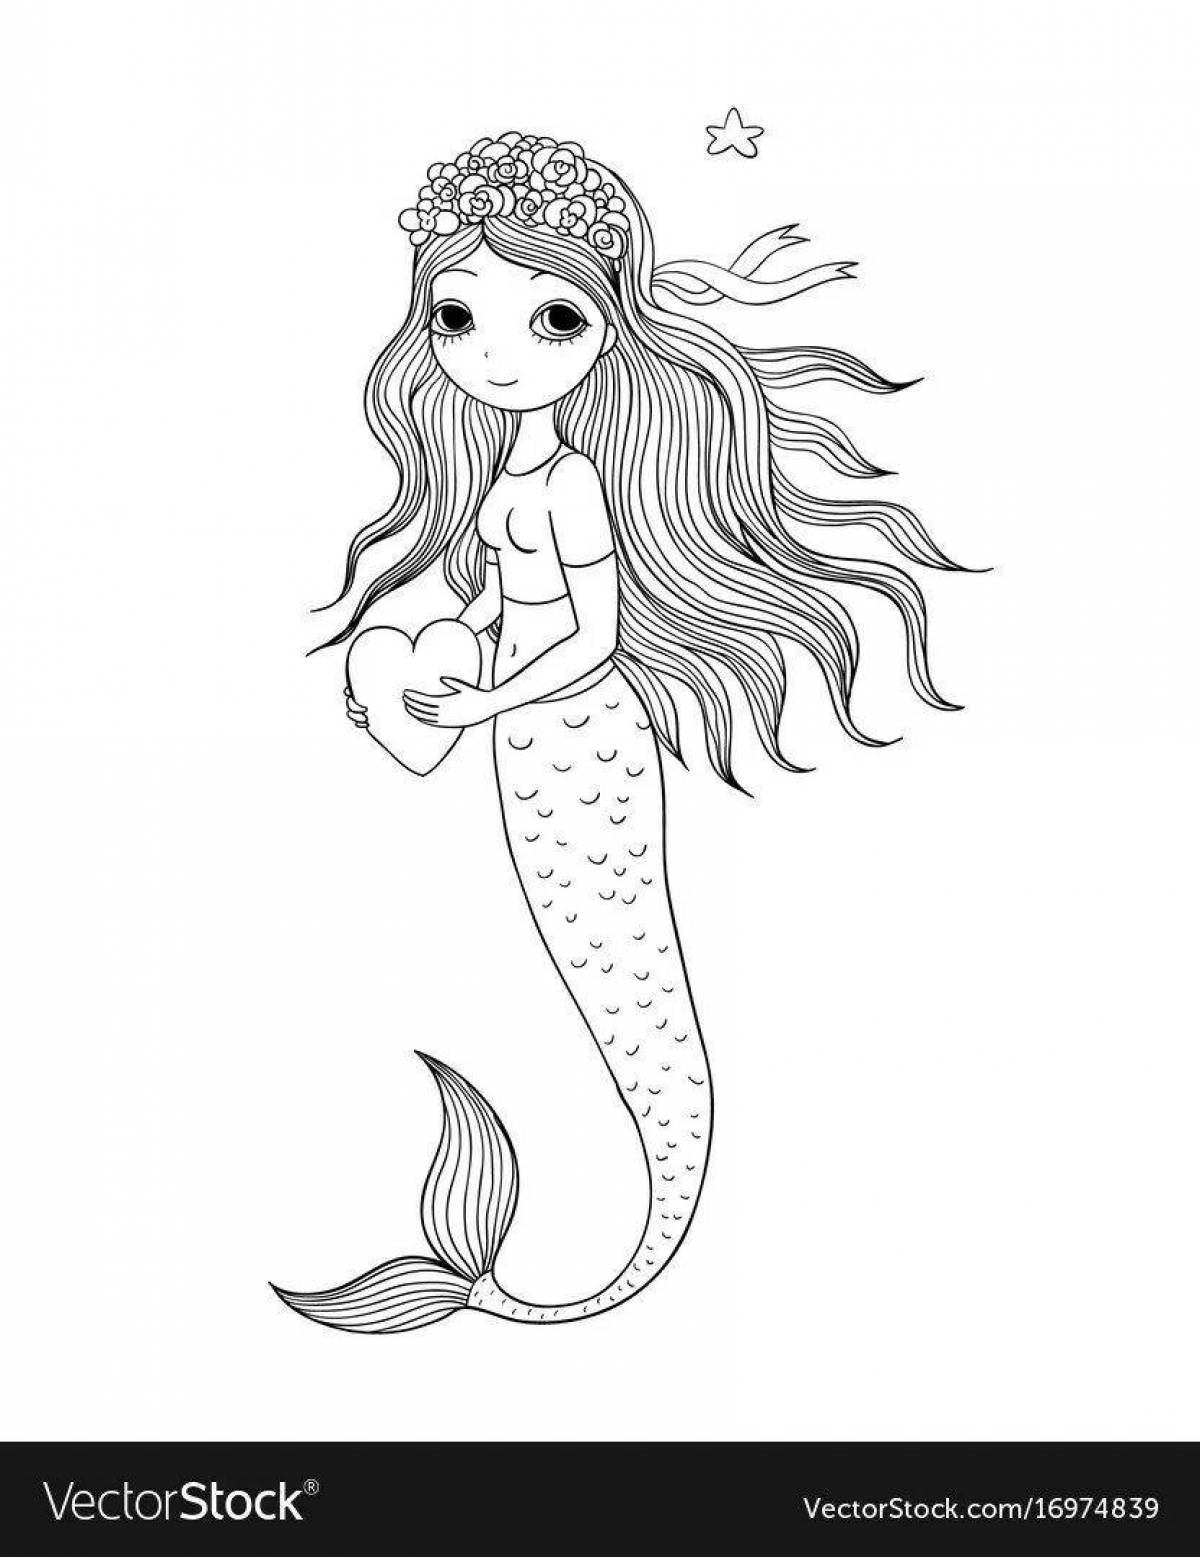 Exquisite siren head coloring page